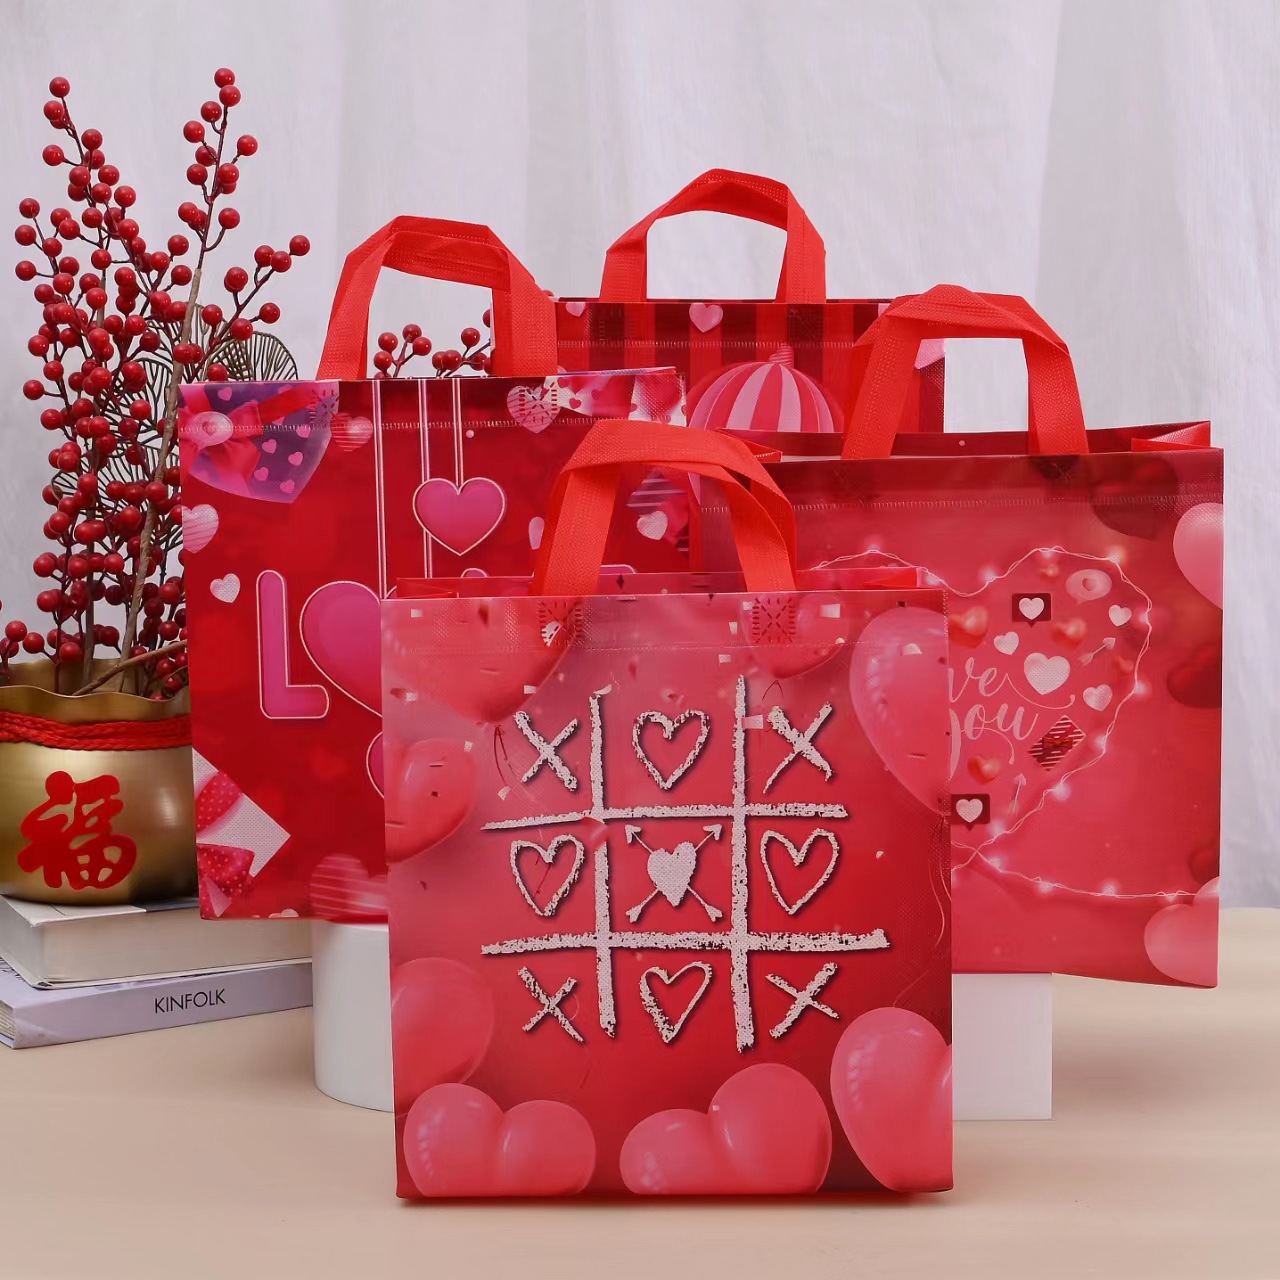 Non-Woven Portable Waterproof Shopping Bag Text Valentine's Day Red Festive Gift Bag Party Gift Packaging Bag Batch